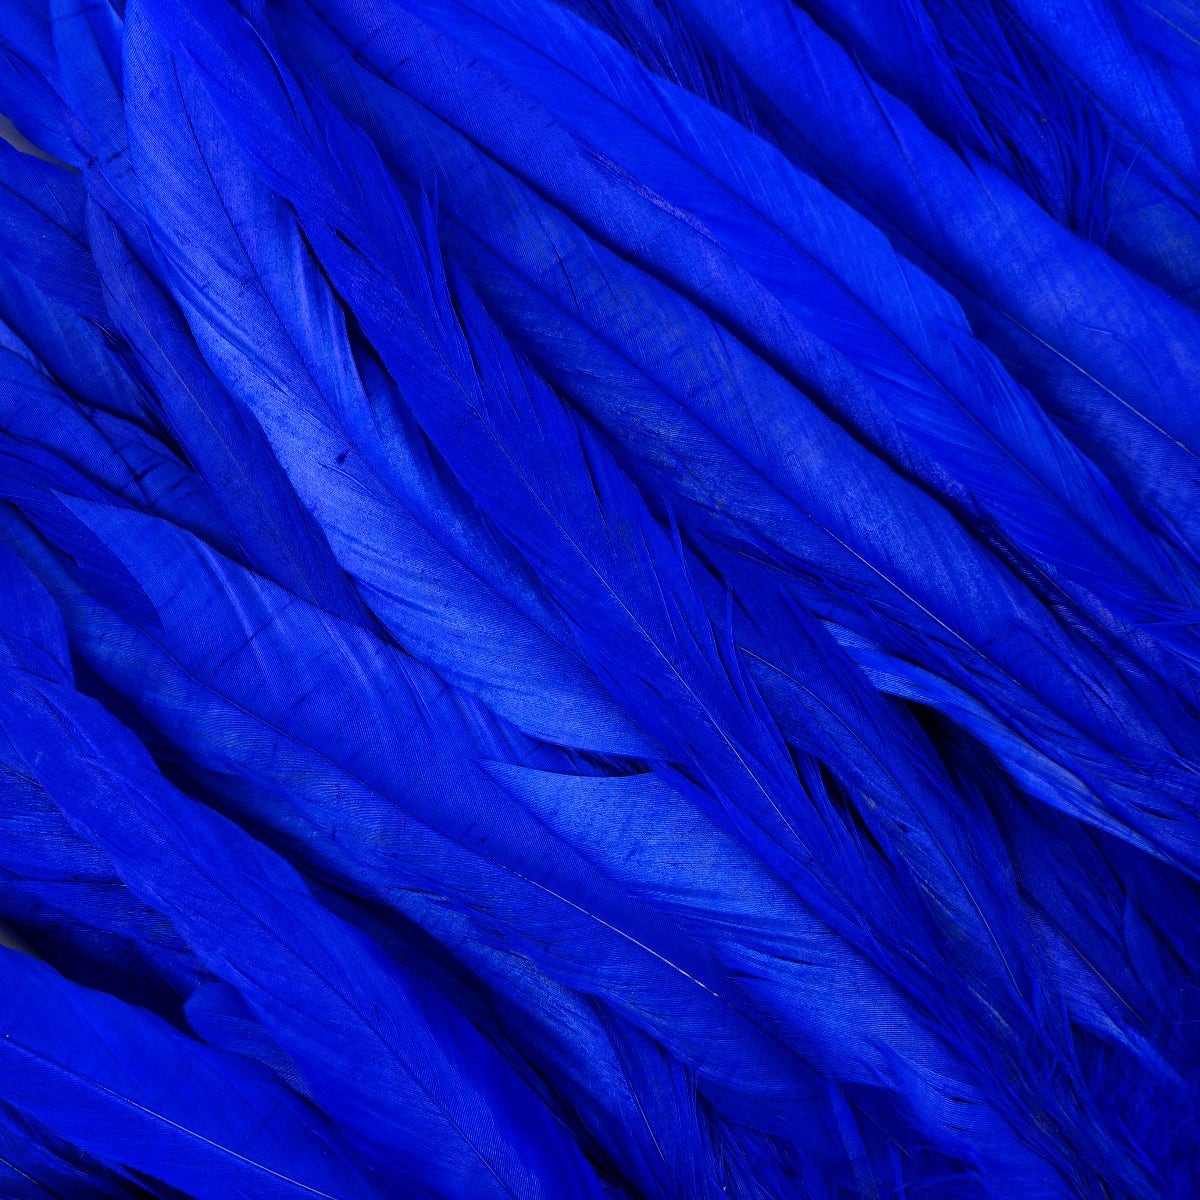 ROOSTER COQUE TAILS FEATHERS BLEACH DYED 7-10” - 1/2 Yard ( 18" ) - Royal